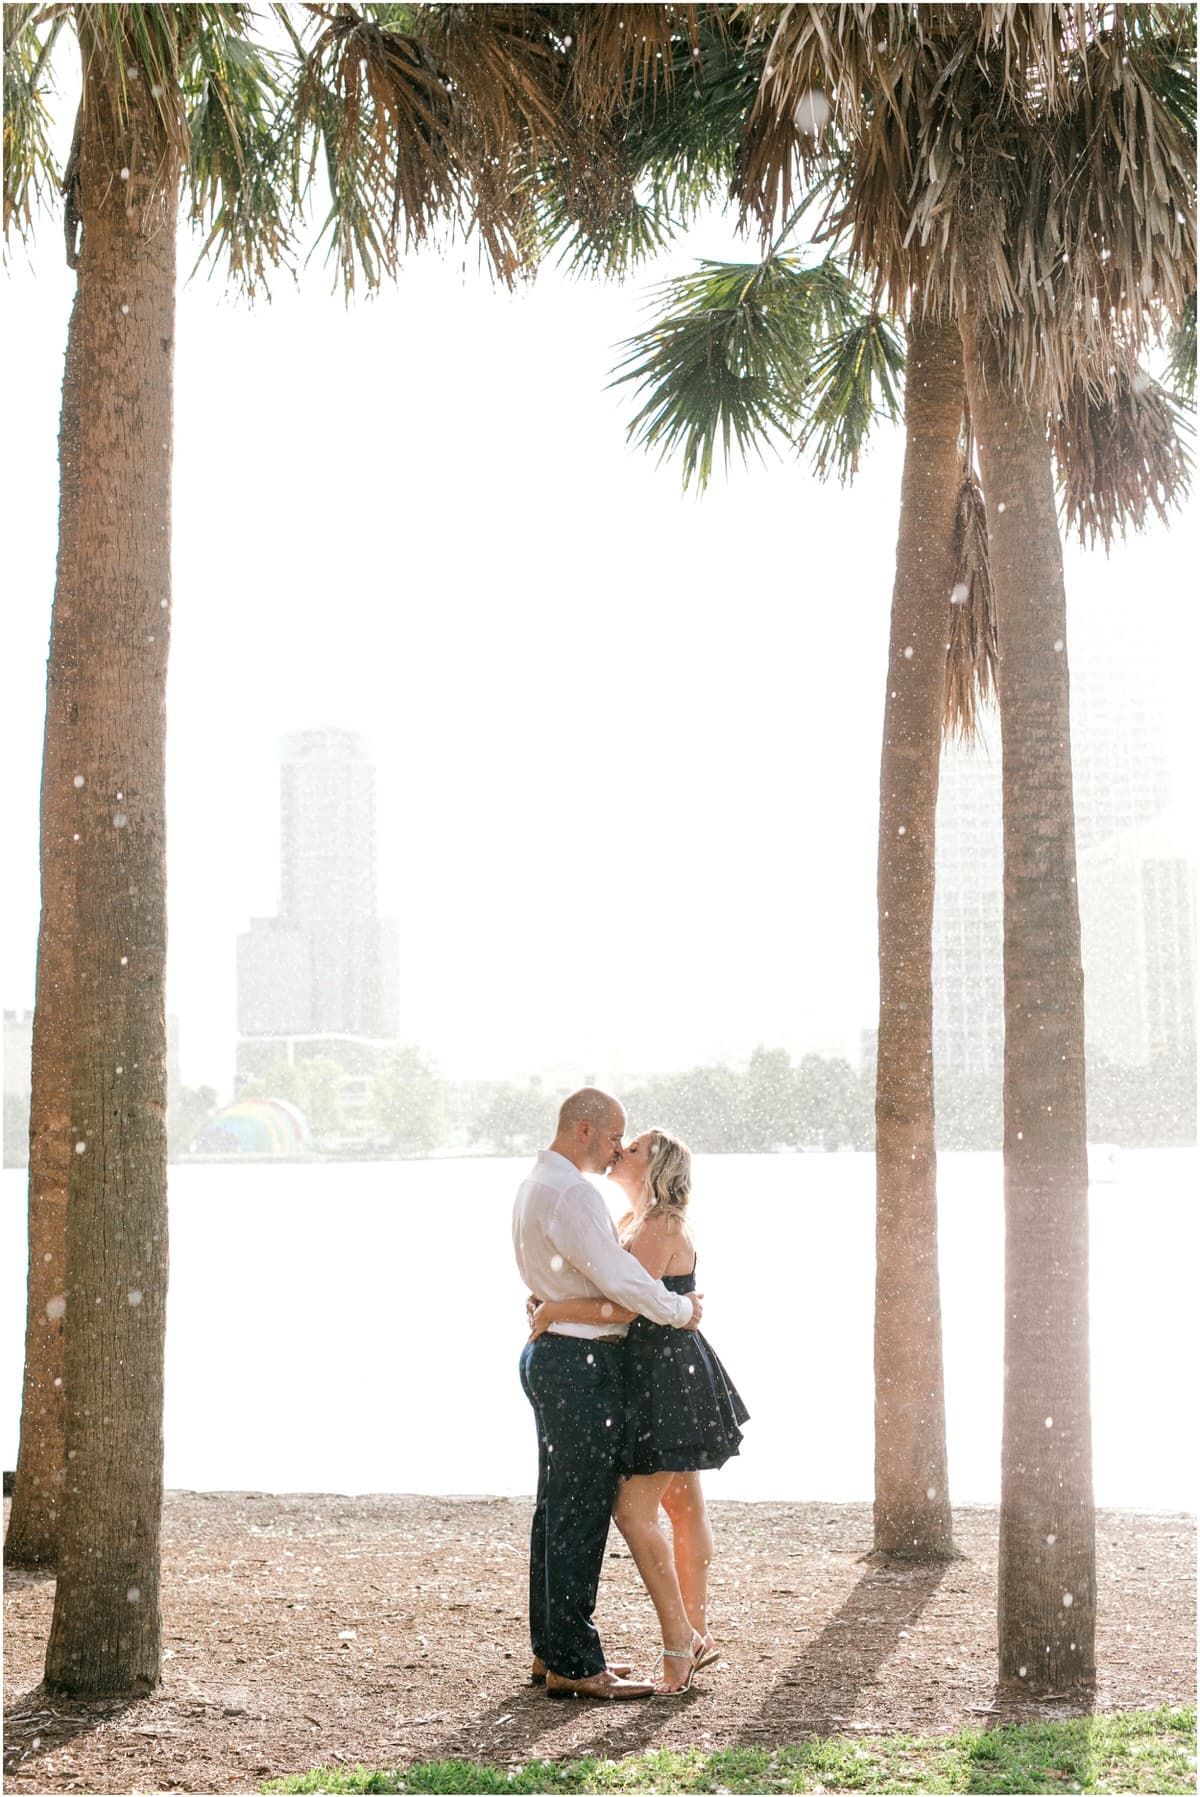 Downtown Orlando Engagement Session couple kissing in the rain under trees